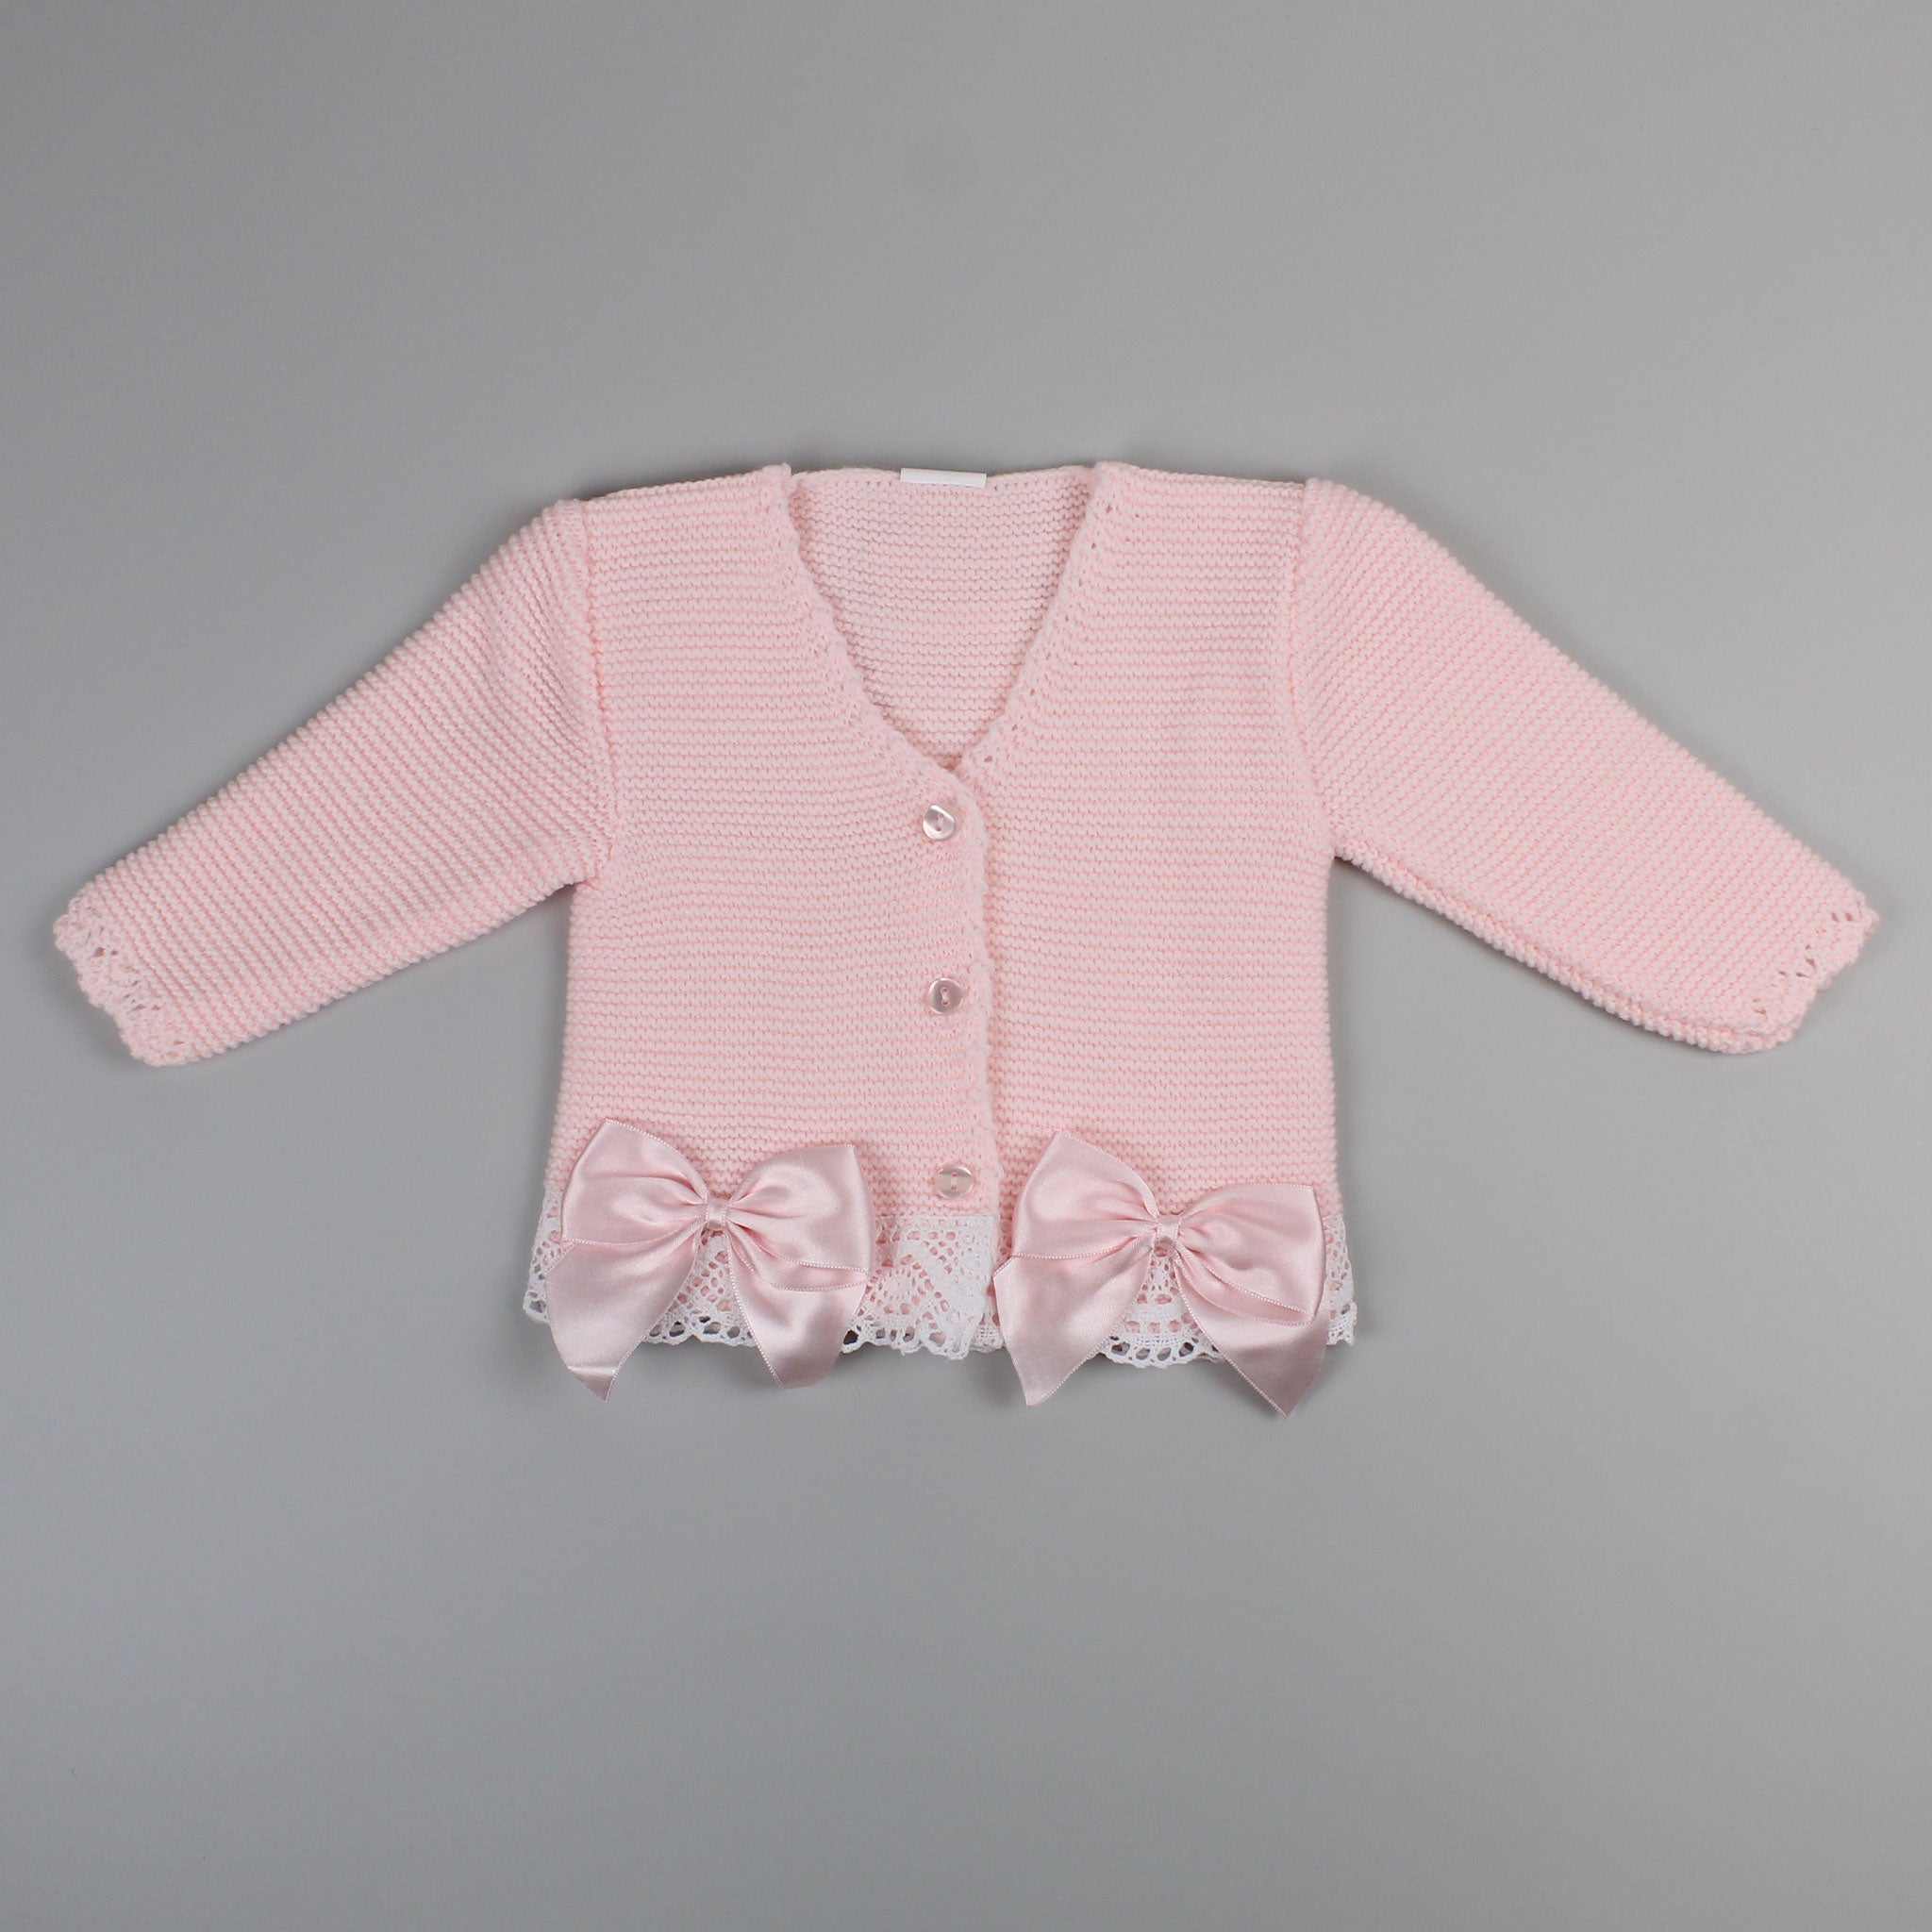 Baby Girls Knitted Cardigan with Lace Trim - Pink